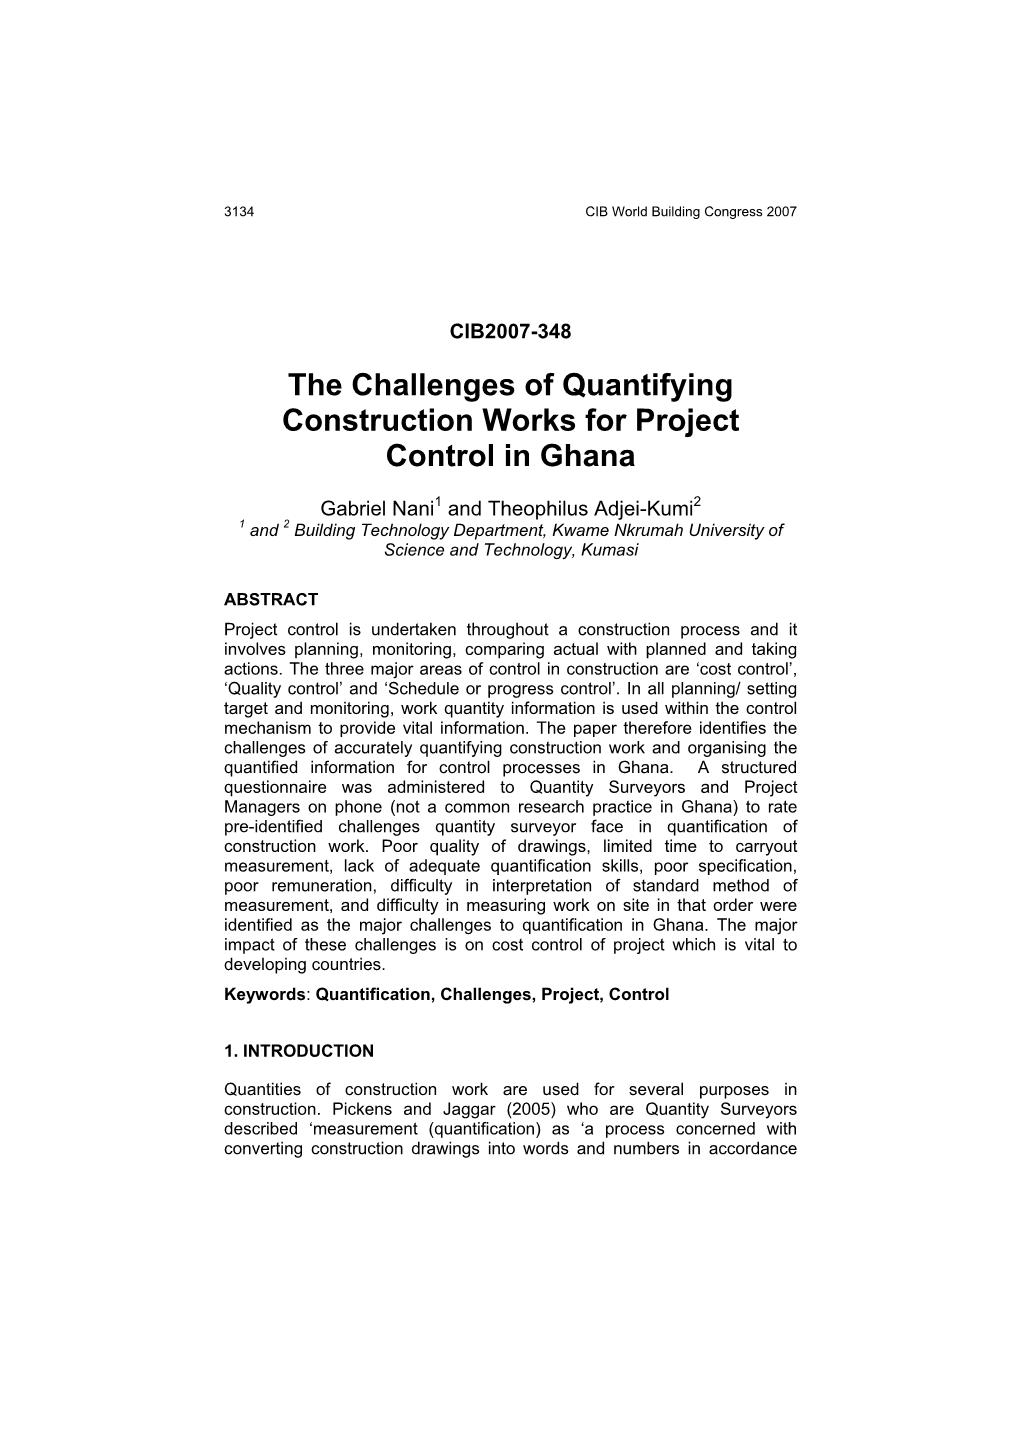 The Challenges of Quantifying Construction Works for Project Control in Ghana